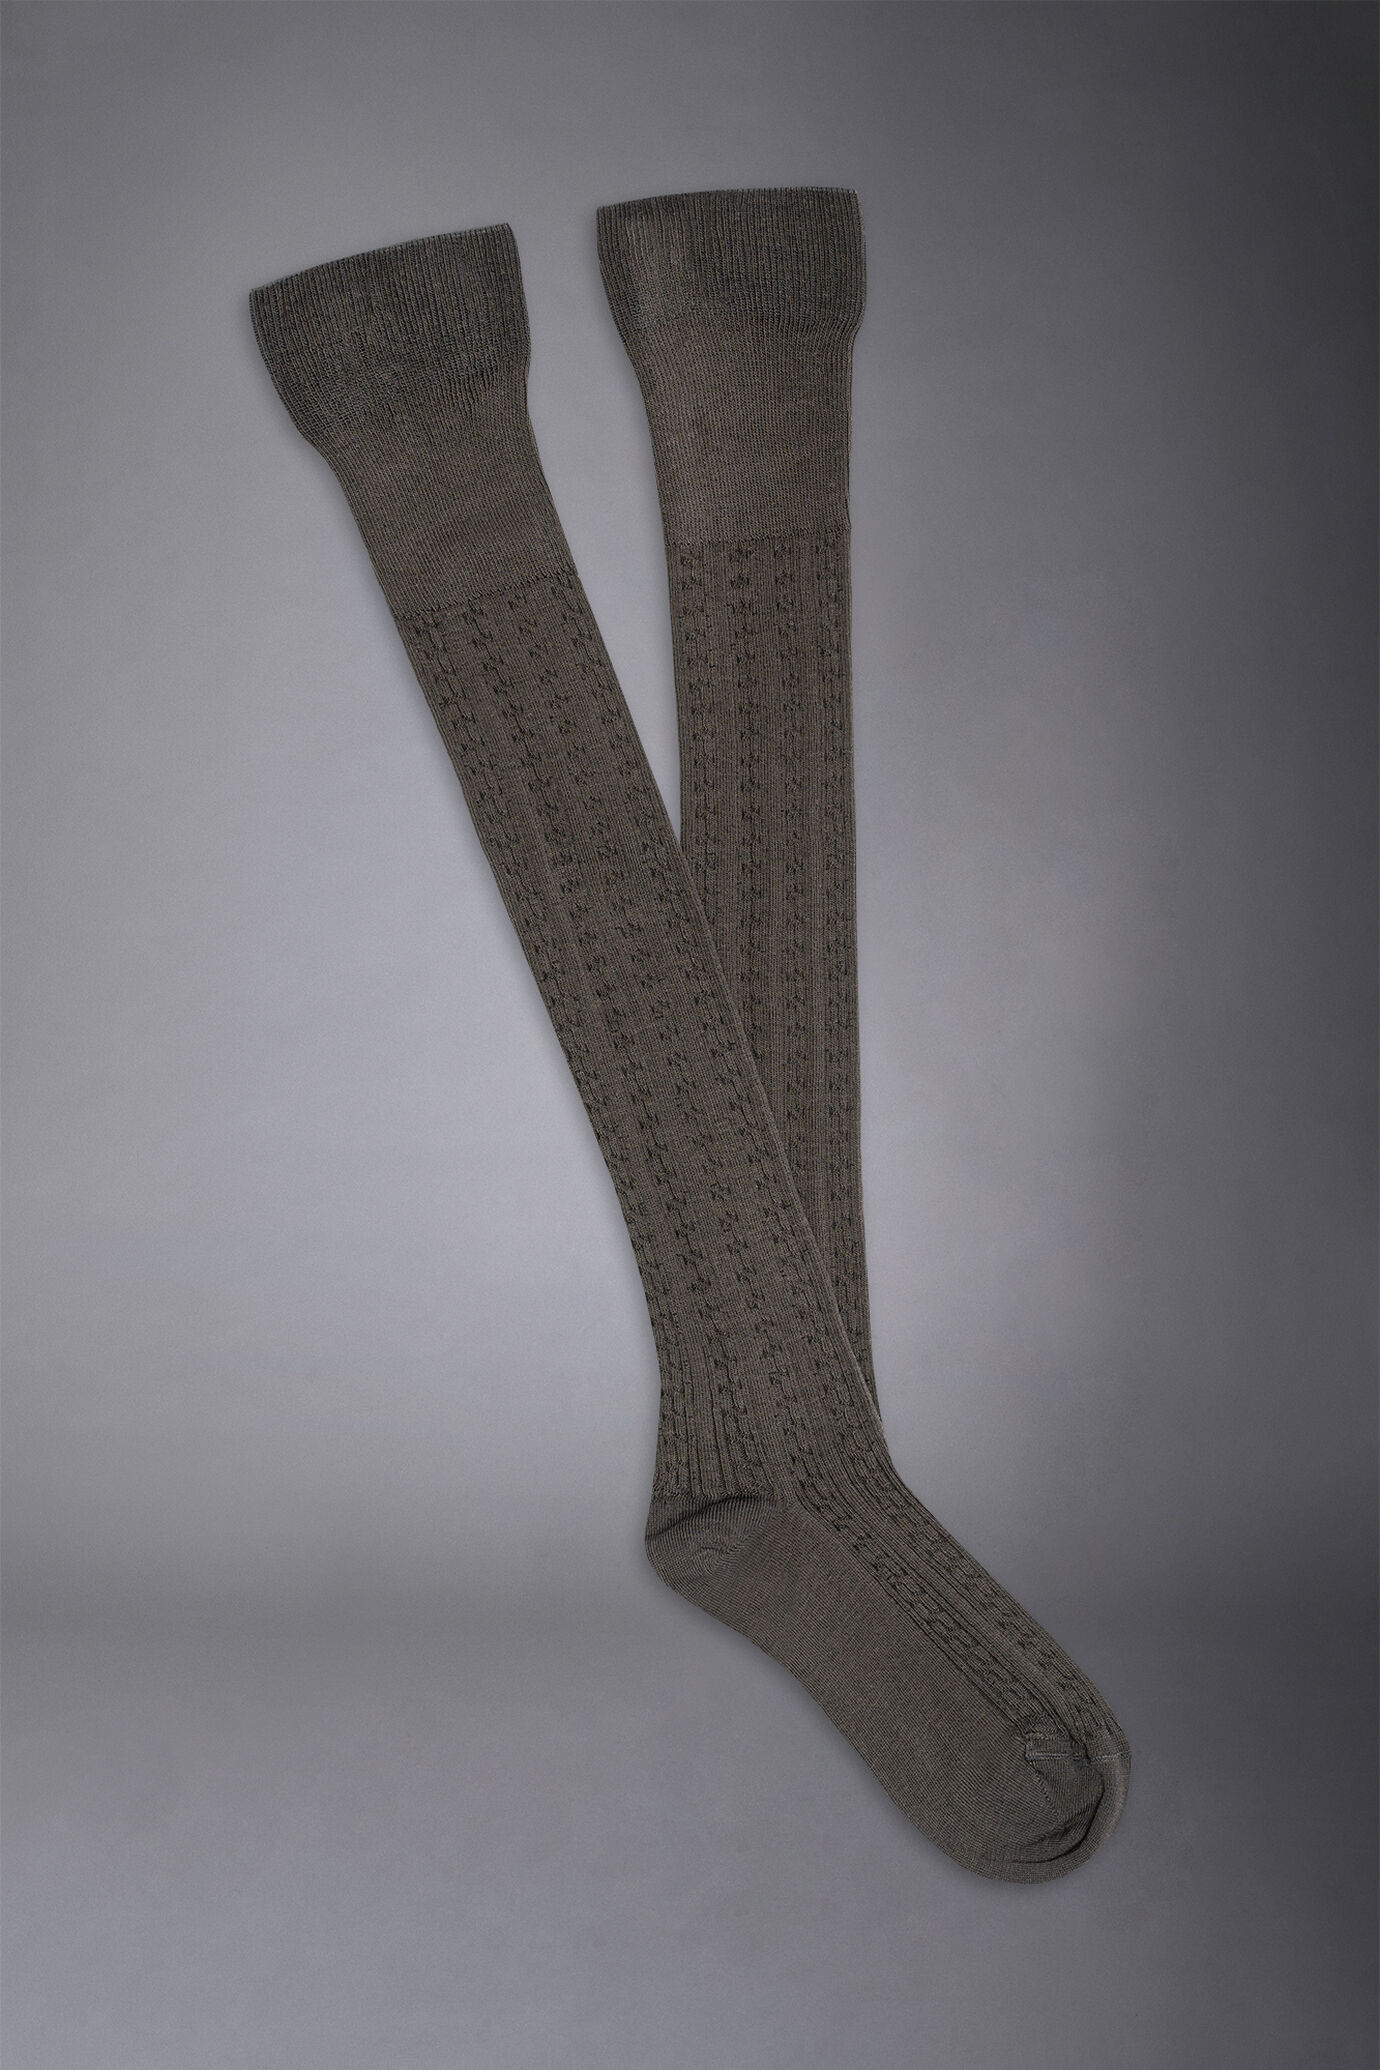 Women's cotton blended parisian socks fancy knitted made in italy